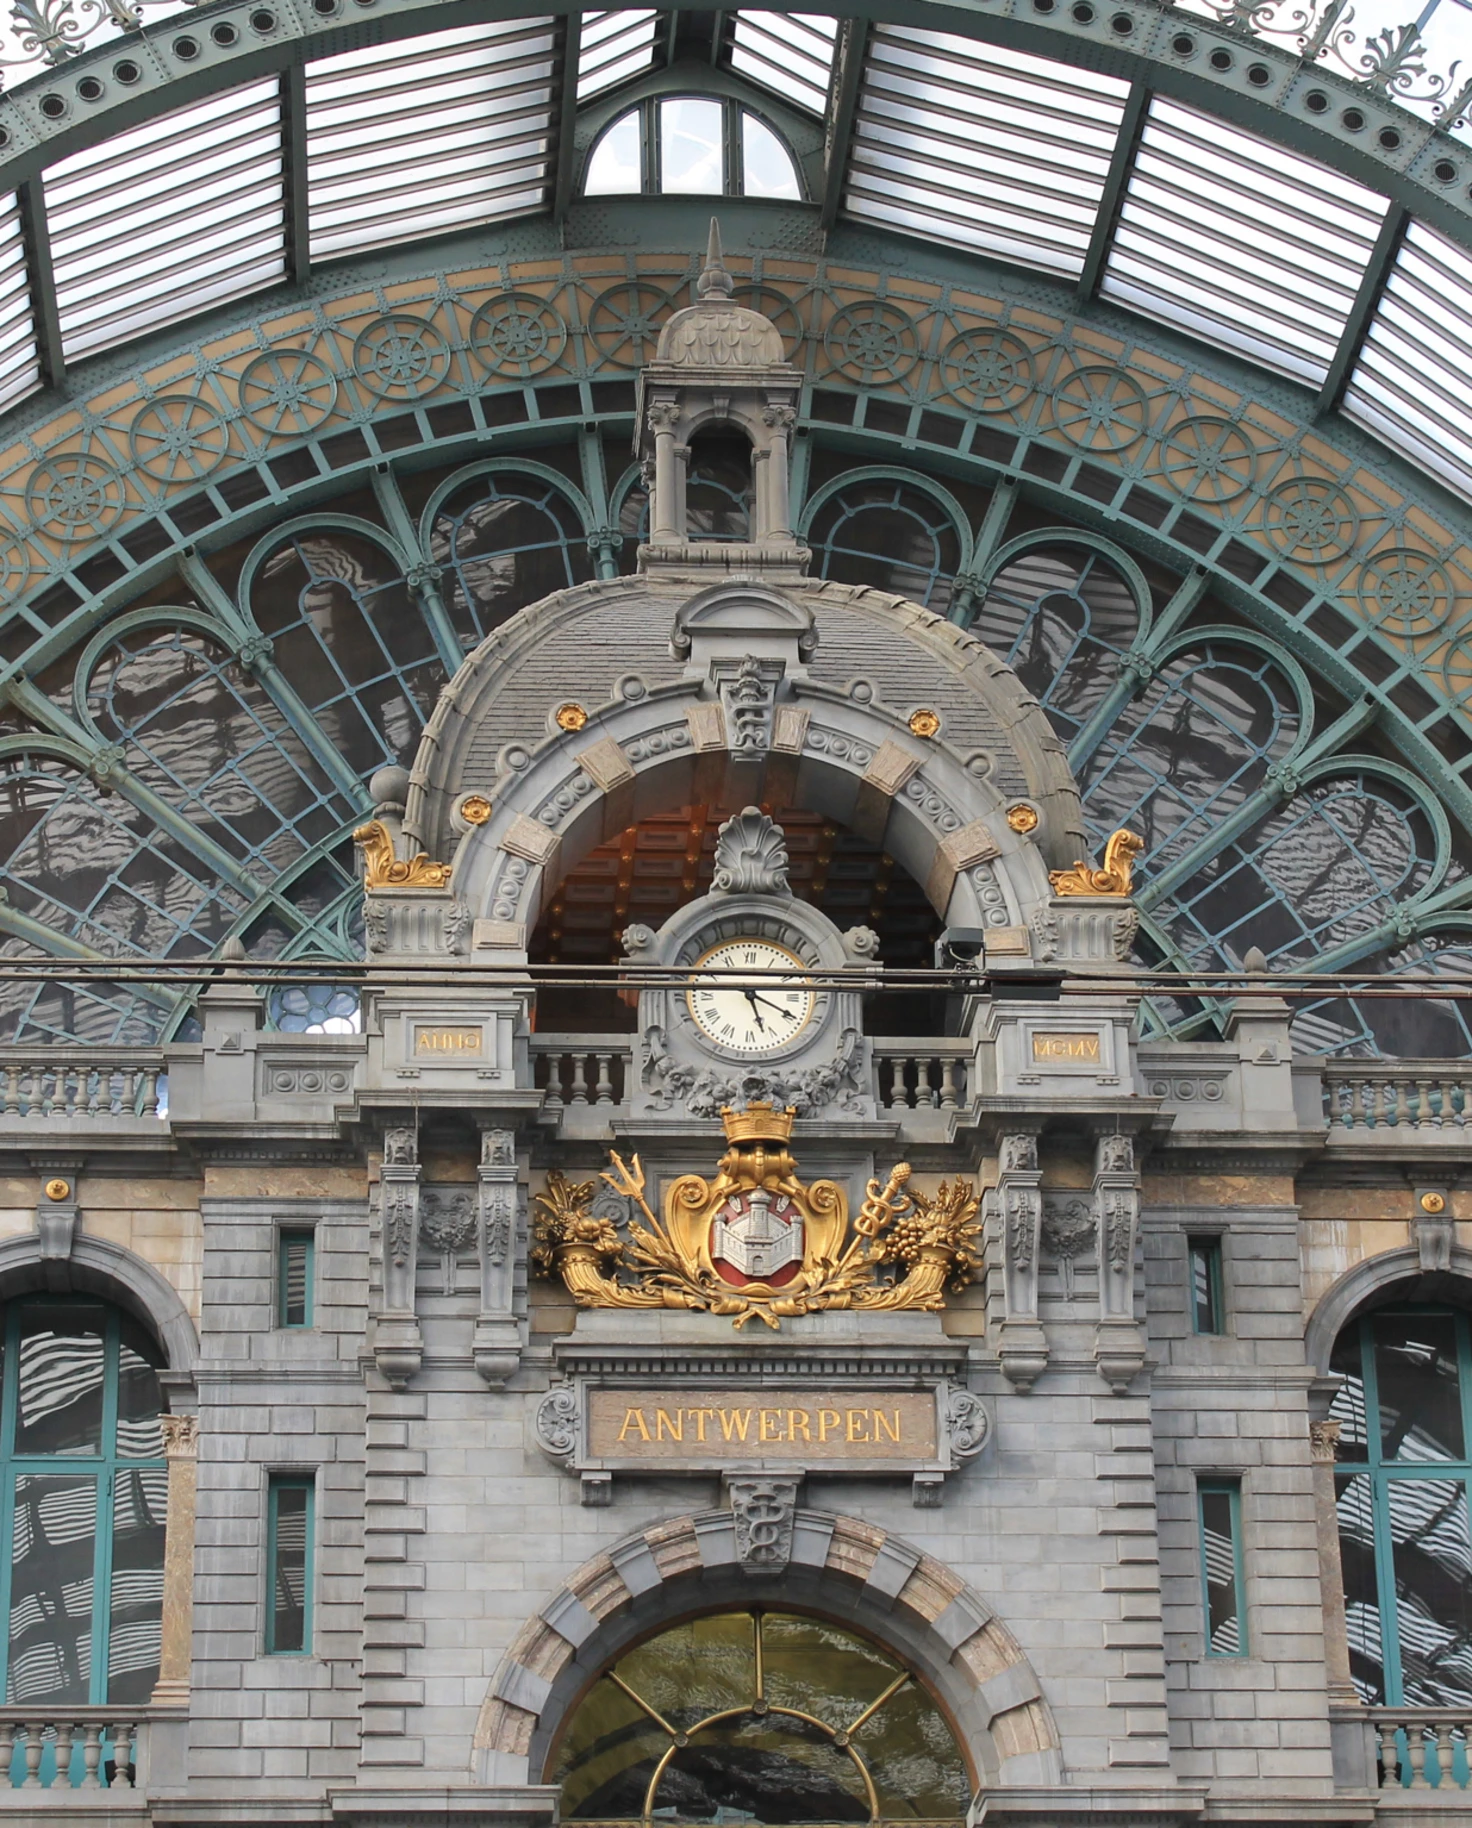 A historical building in Antwerp with clock on the entrance wall.